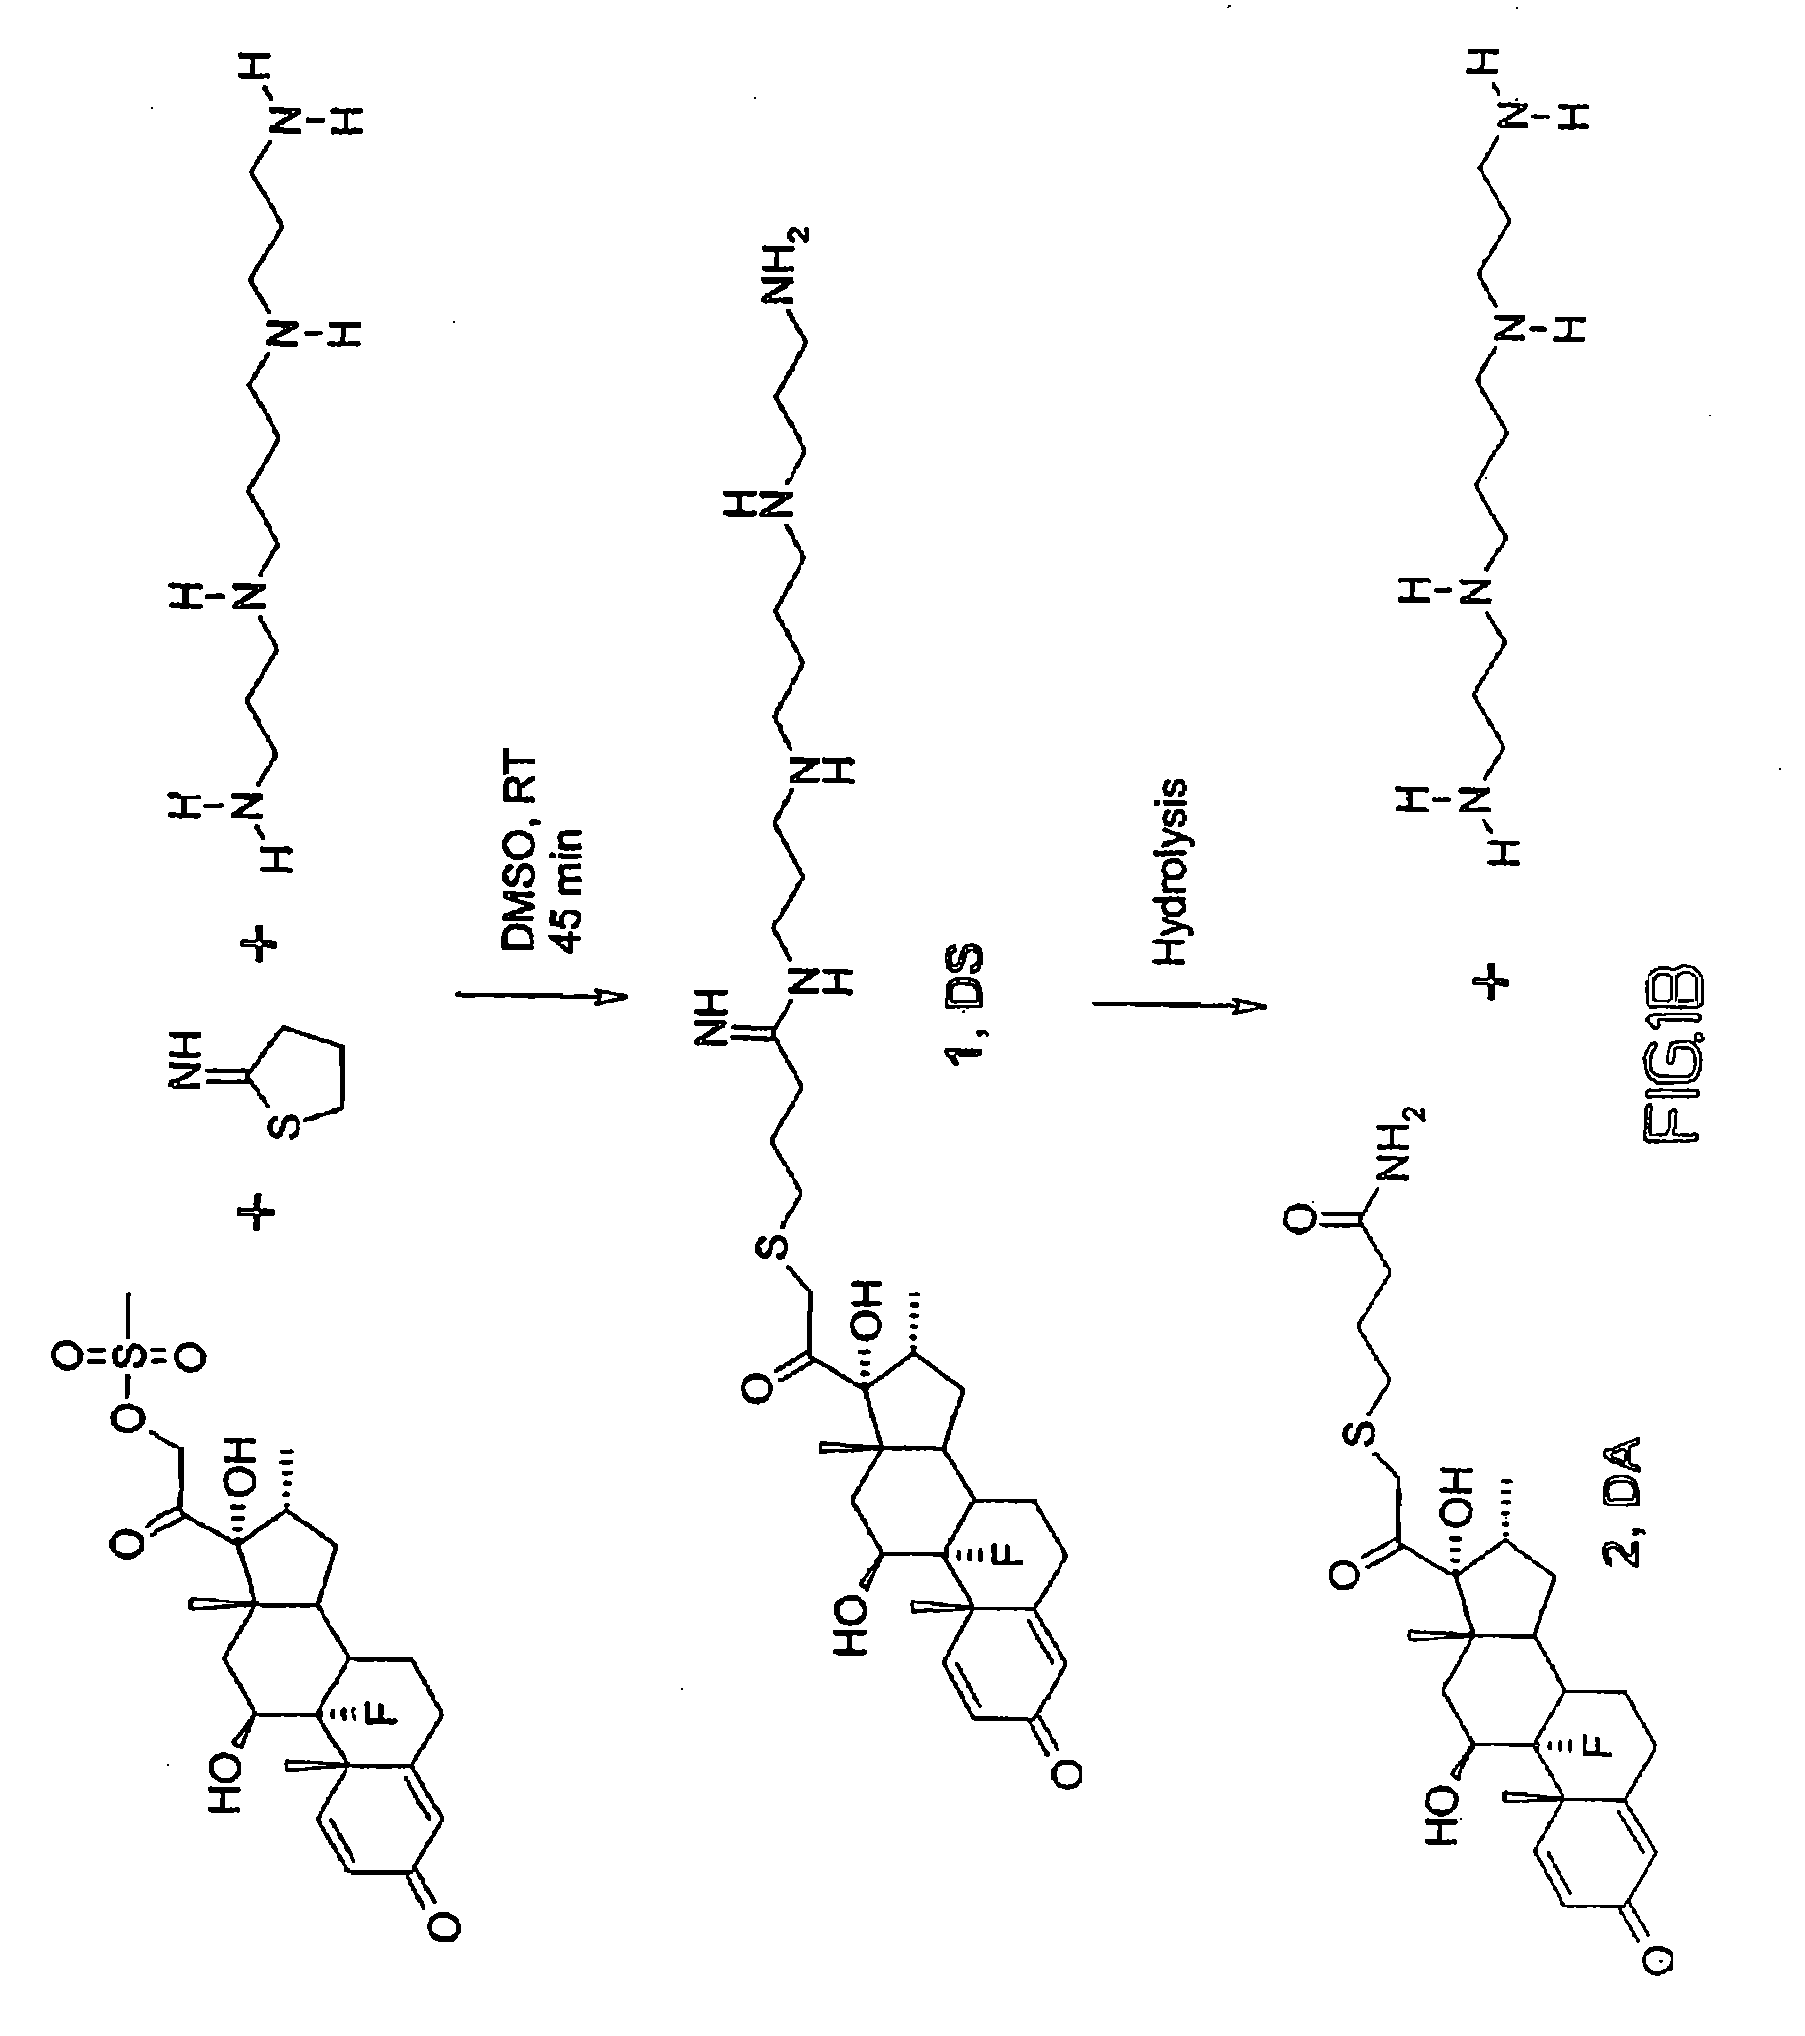 Synthesis and Use of Cationic Steroids for Anti-Inflammatory Drug Therapy